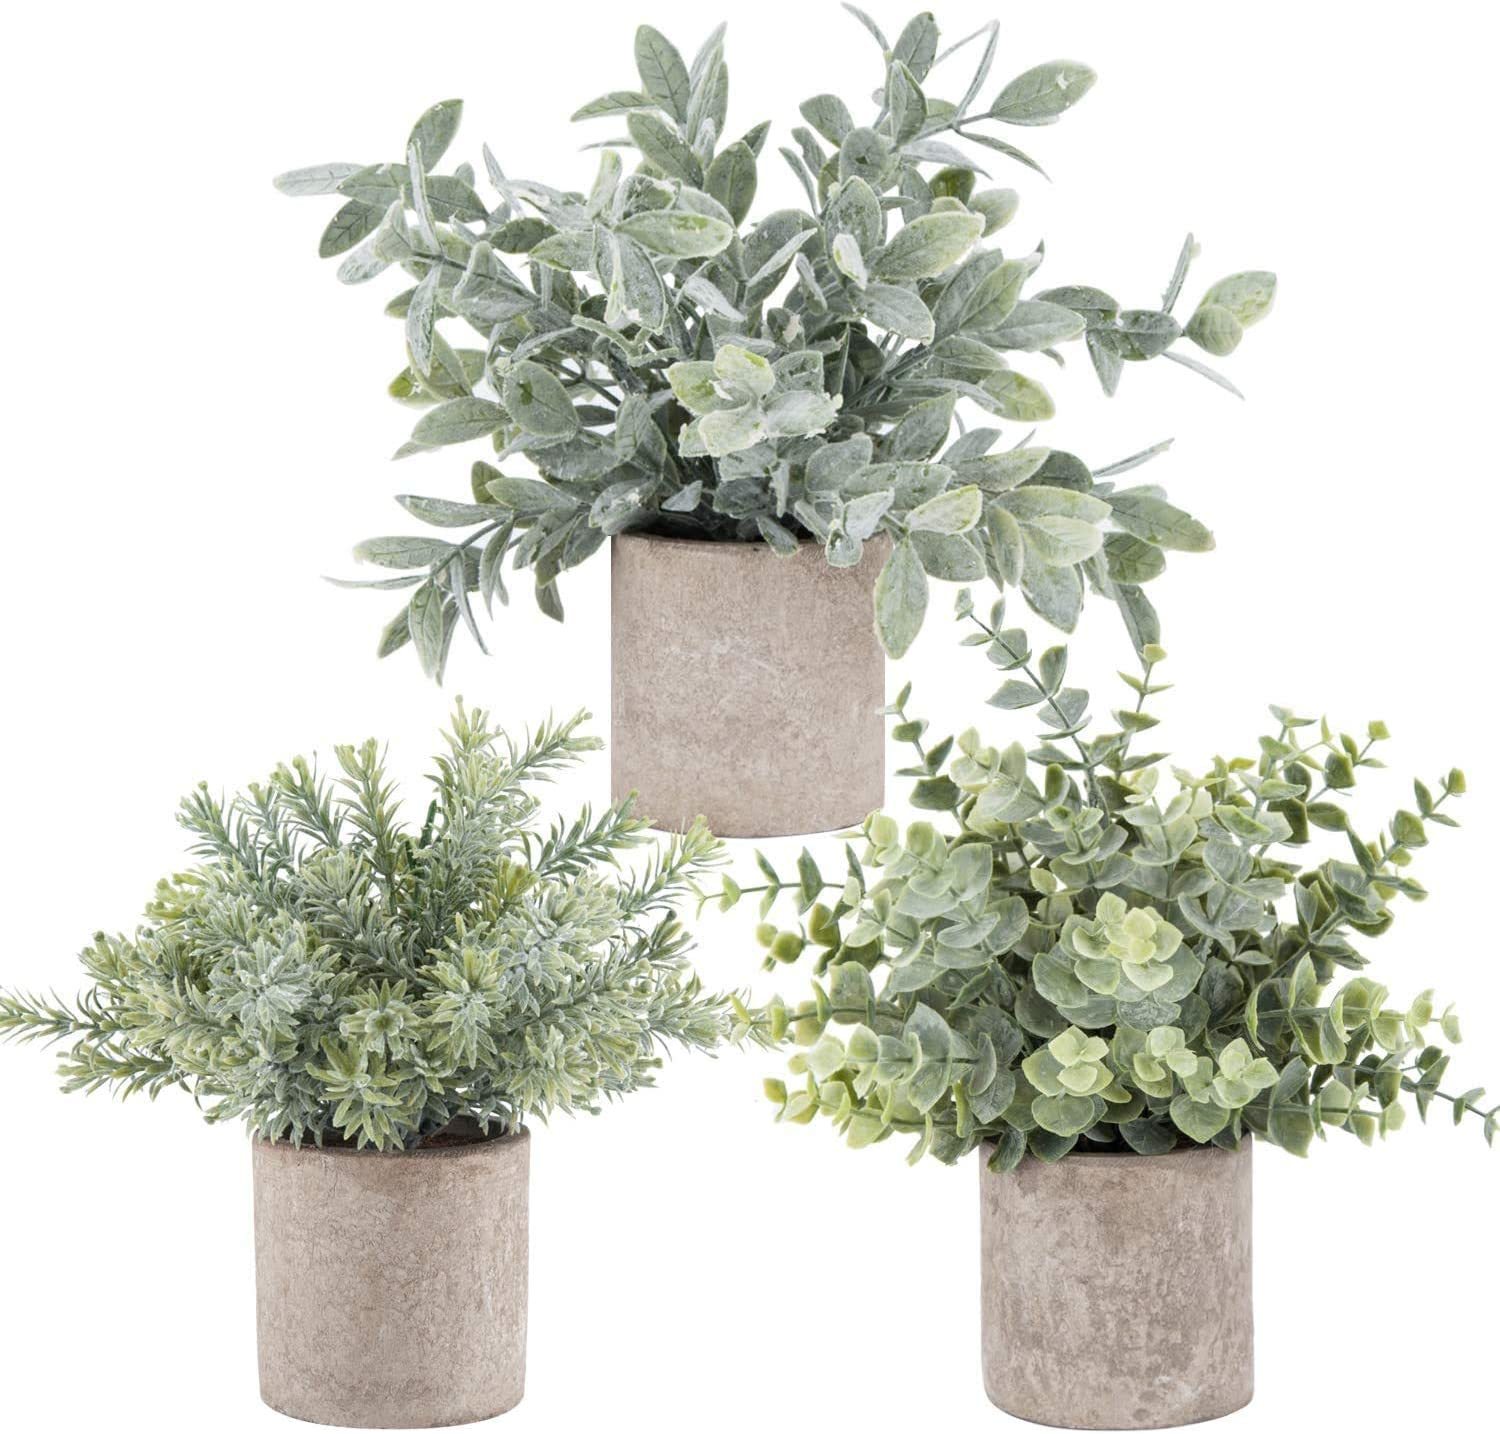 Primary image for Der Rose 3 Pack Mini Potted Fake Plants Artificial Plastic Eucalyptus Plants For